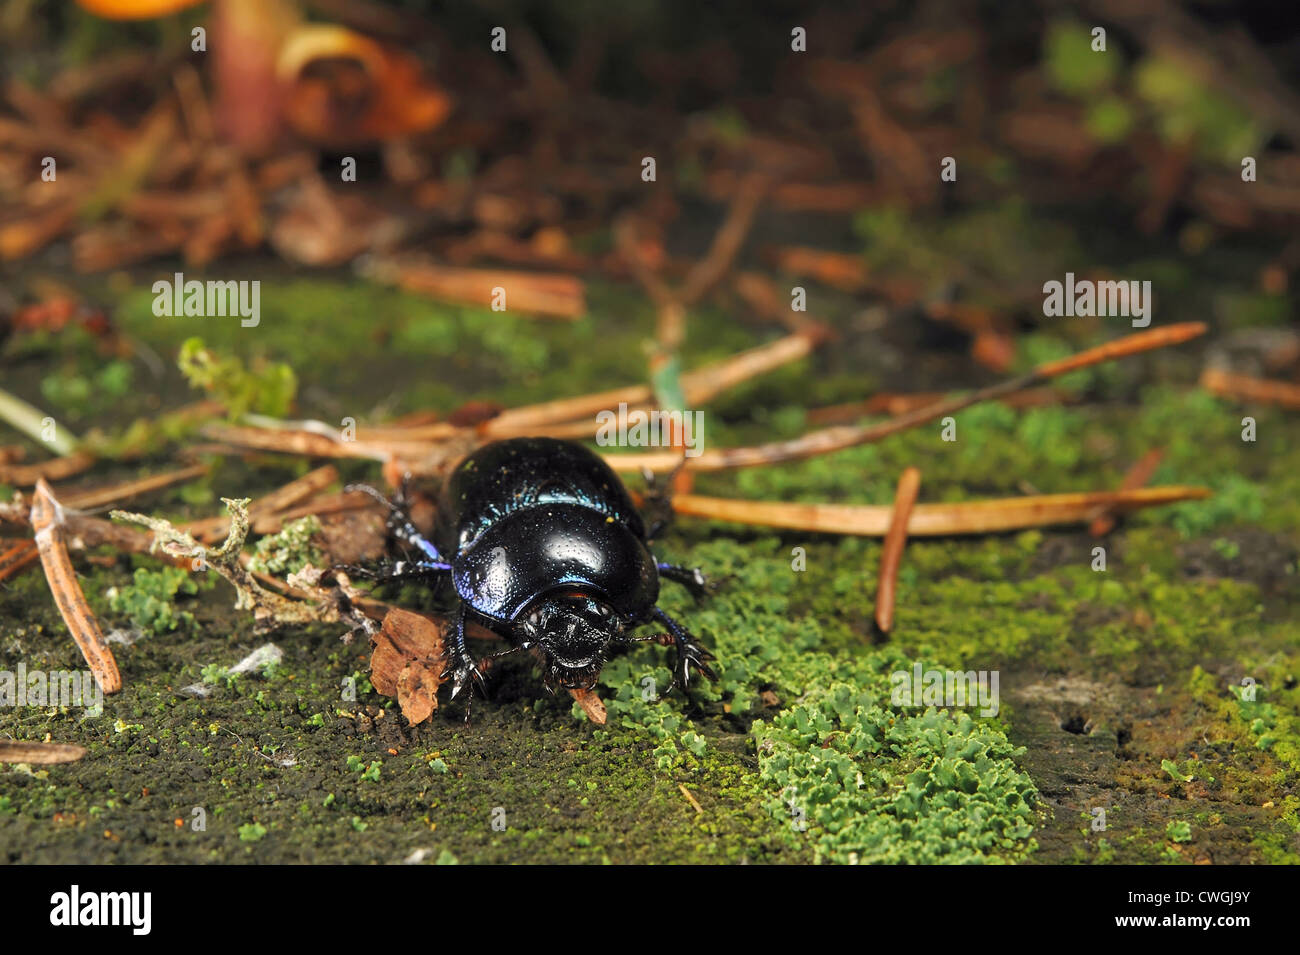 Forest dung beetle camminando in una foresta Foto Stock